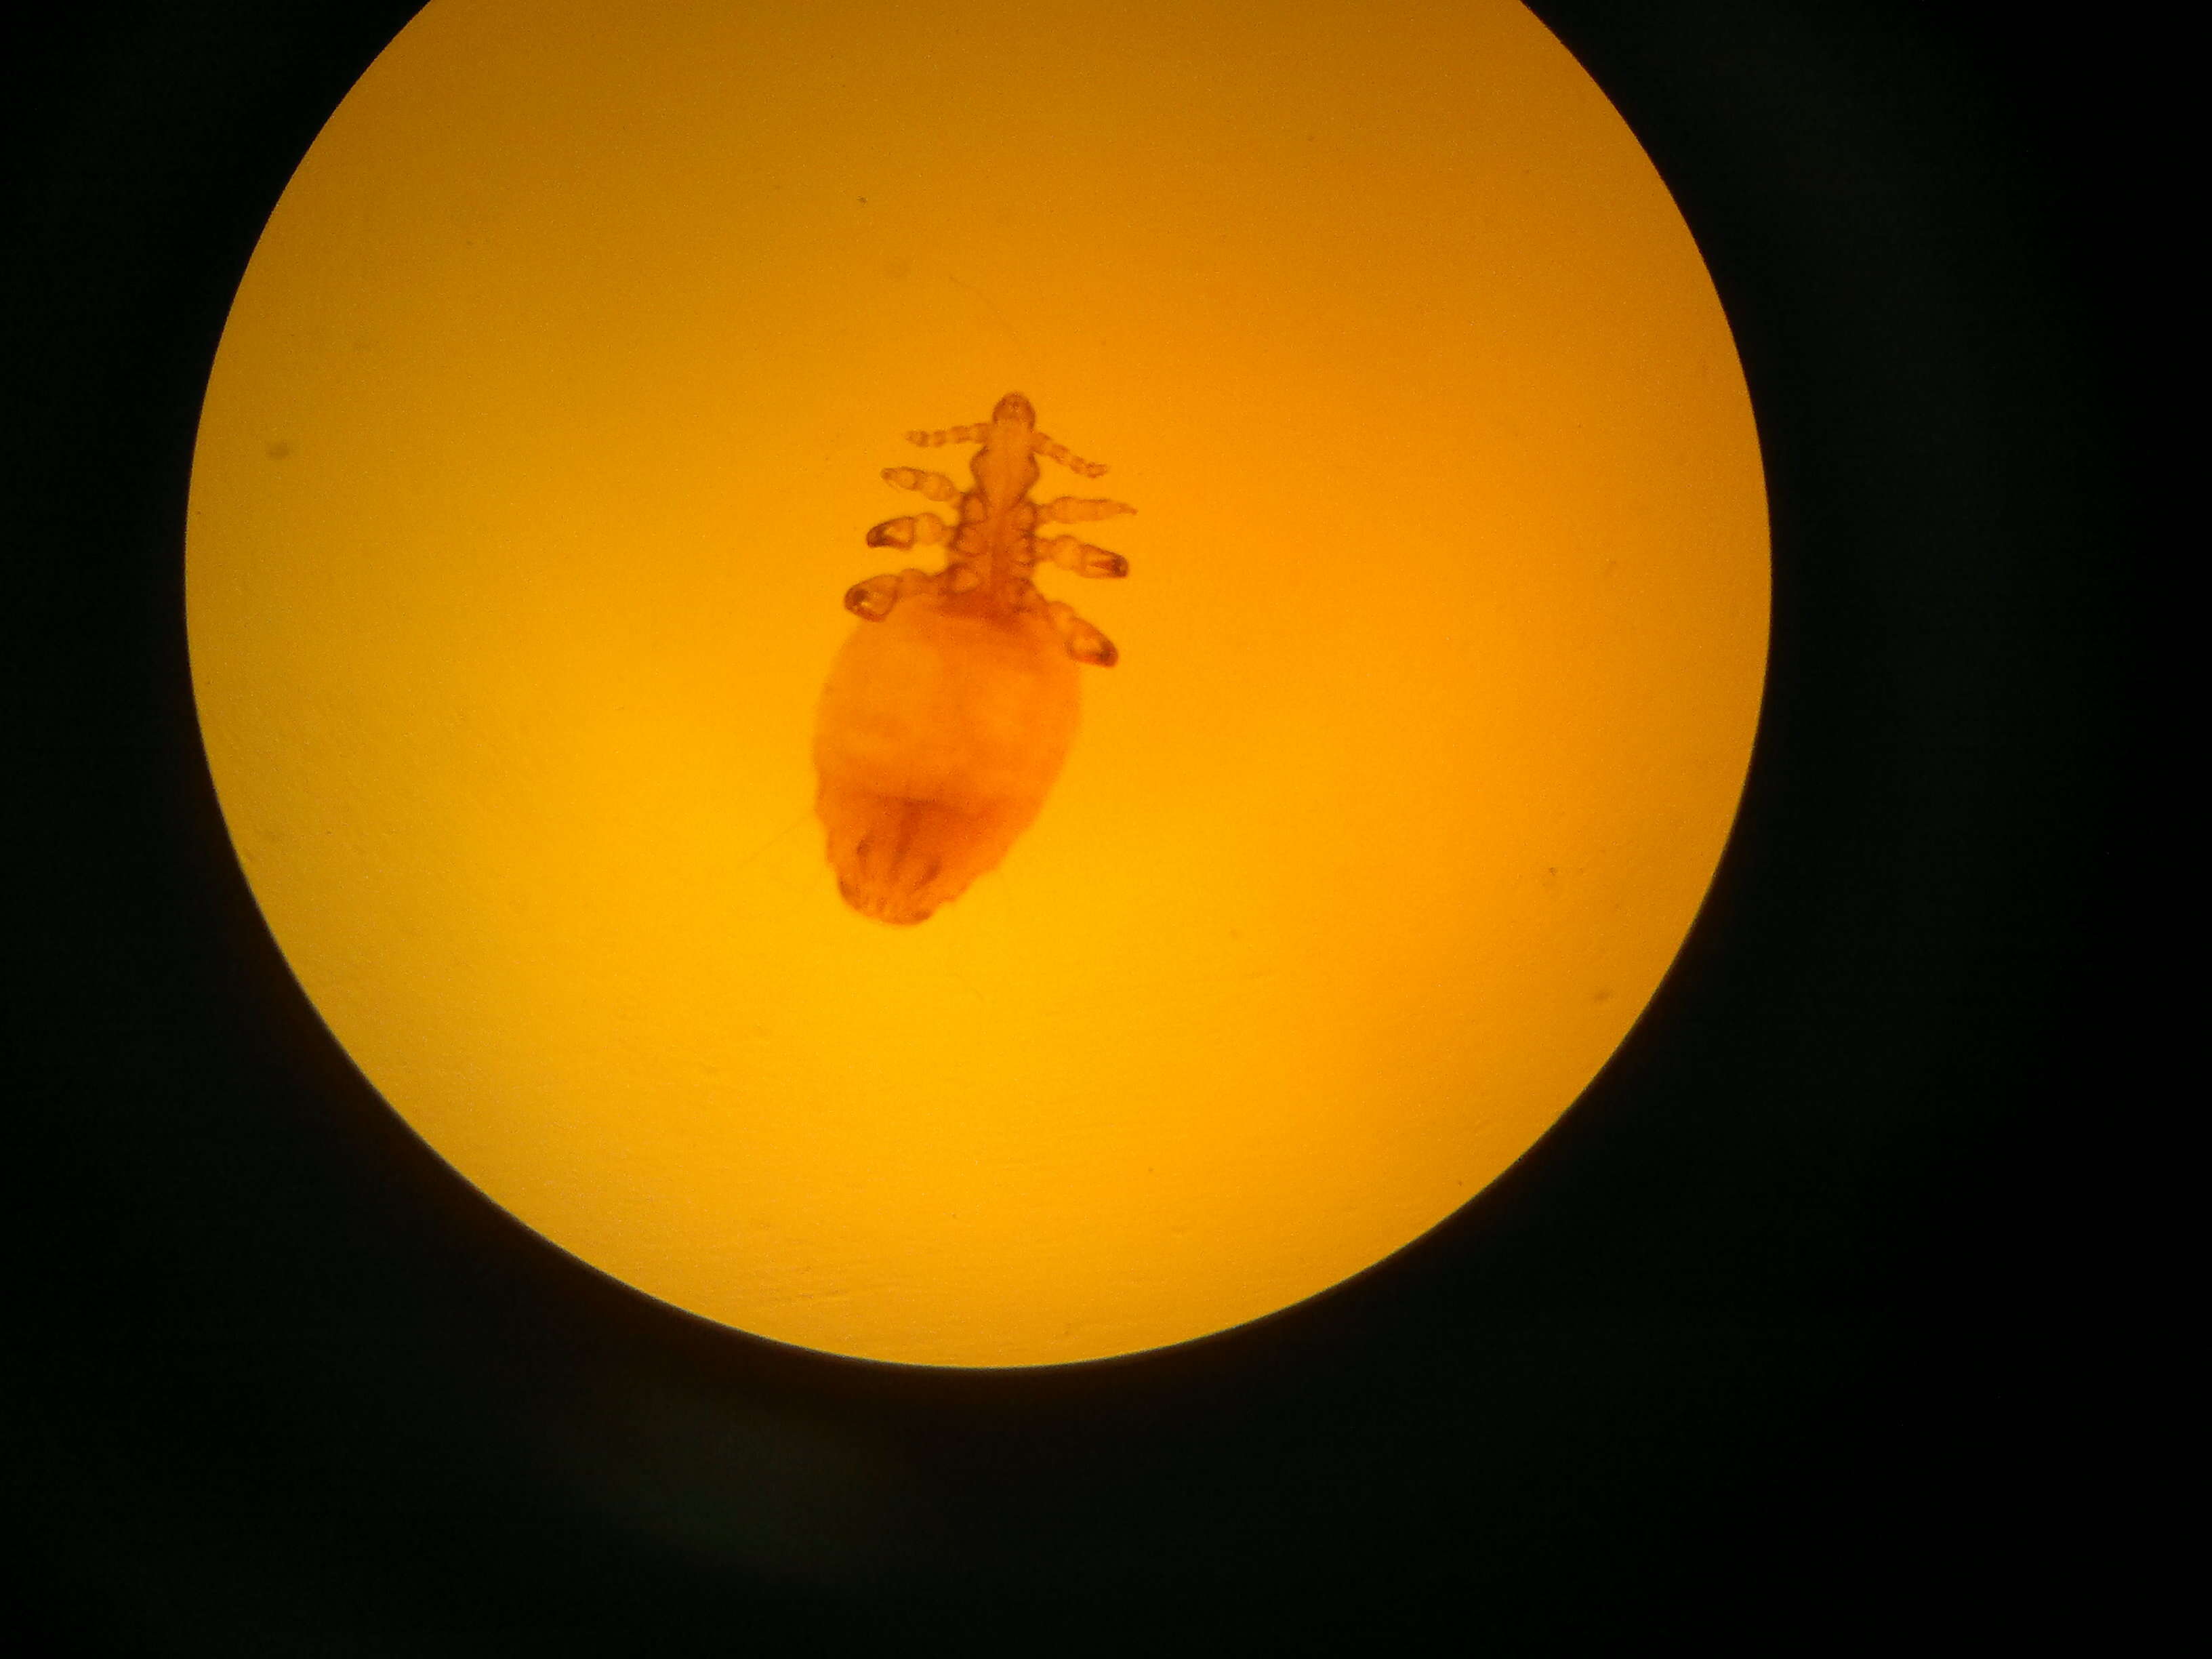 Image of Body Louse